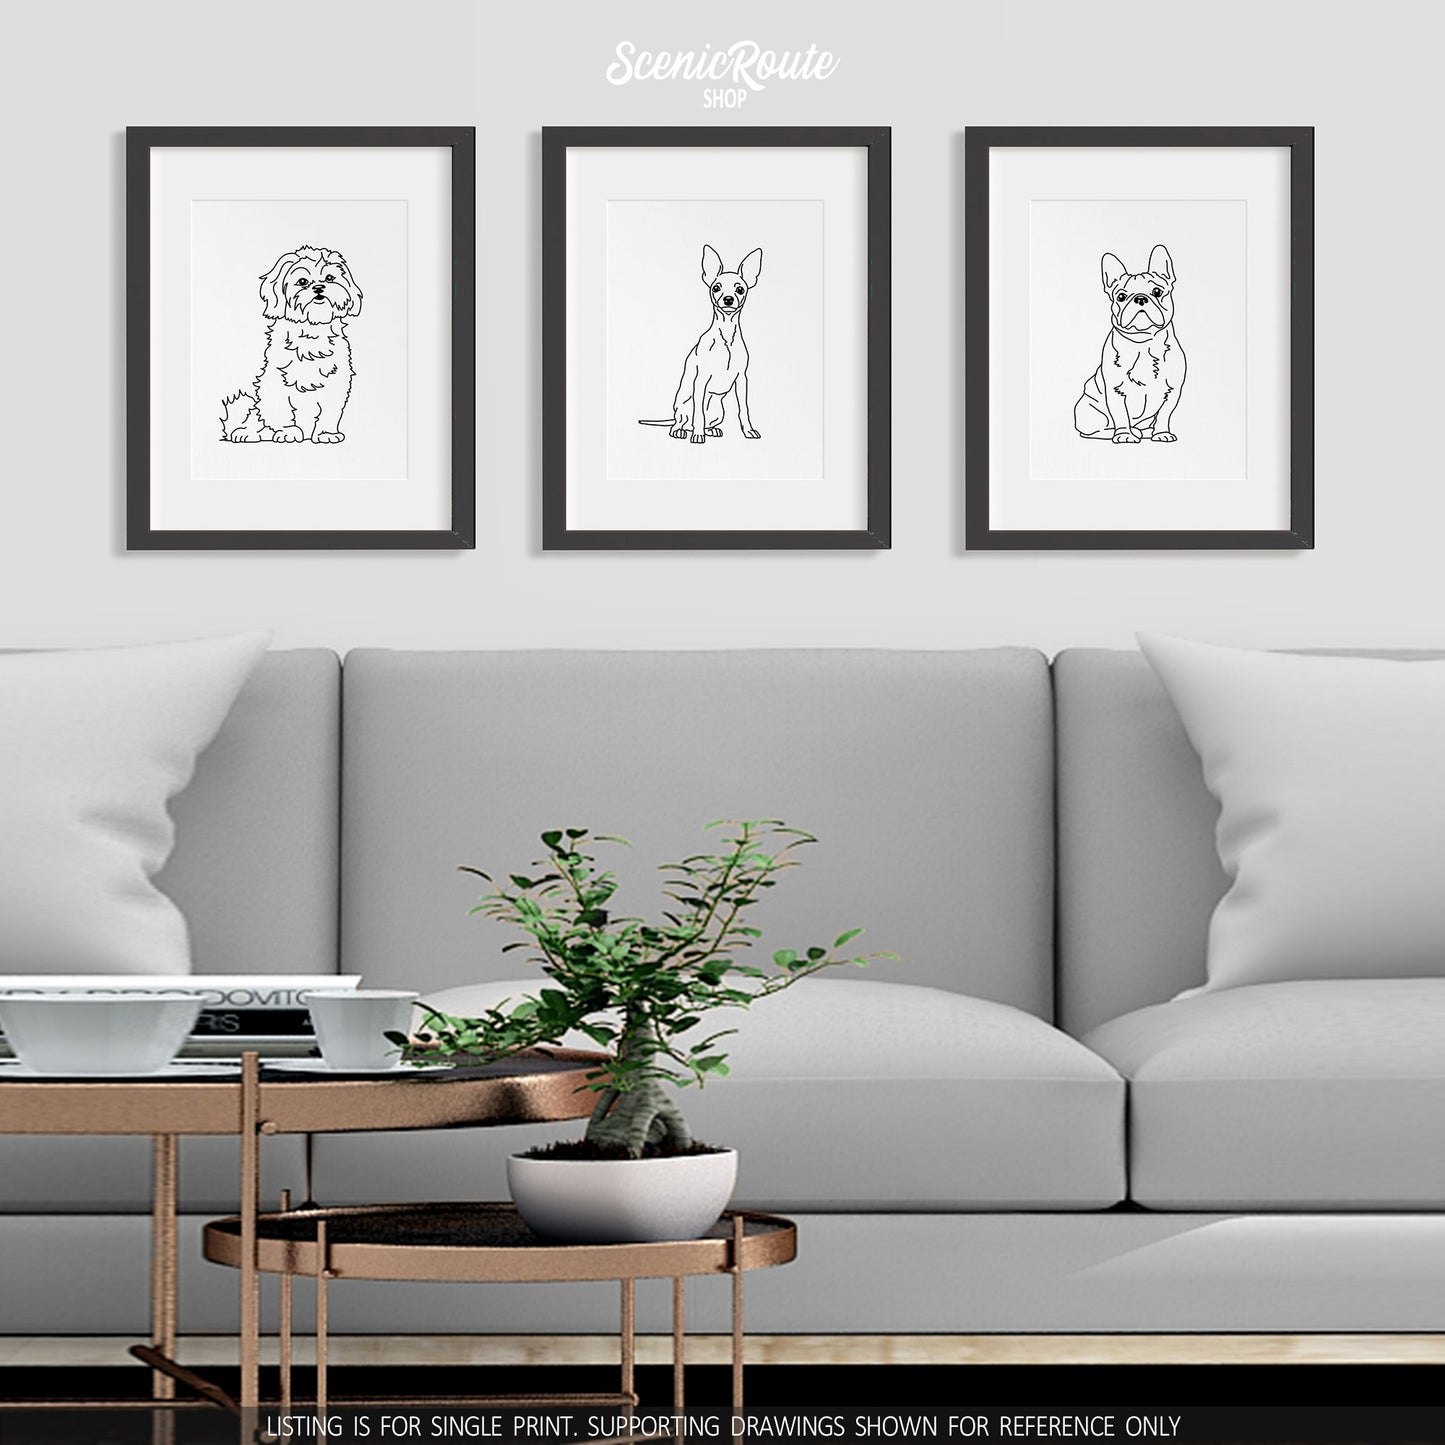 A group of three framed drawings on a white wall above a couch with a coffee table and plant. The line art drawings include a Shih Tzu dog, a Miniature Pinscher dog, and a French Bulldog